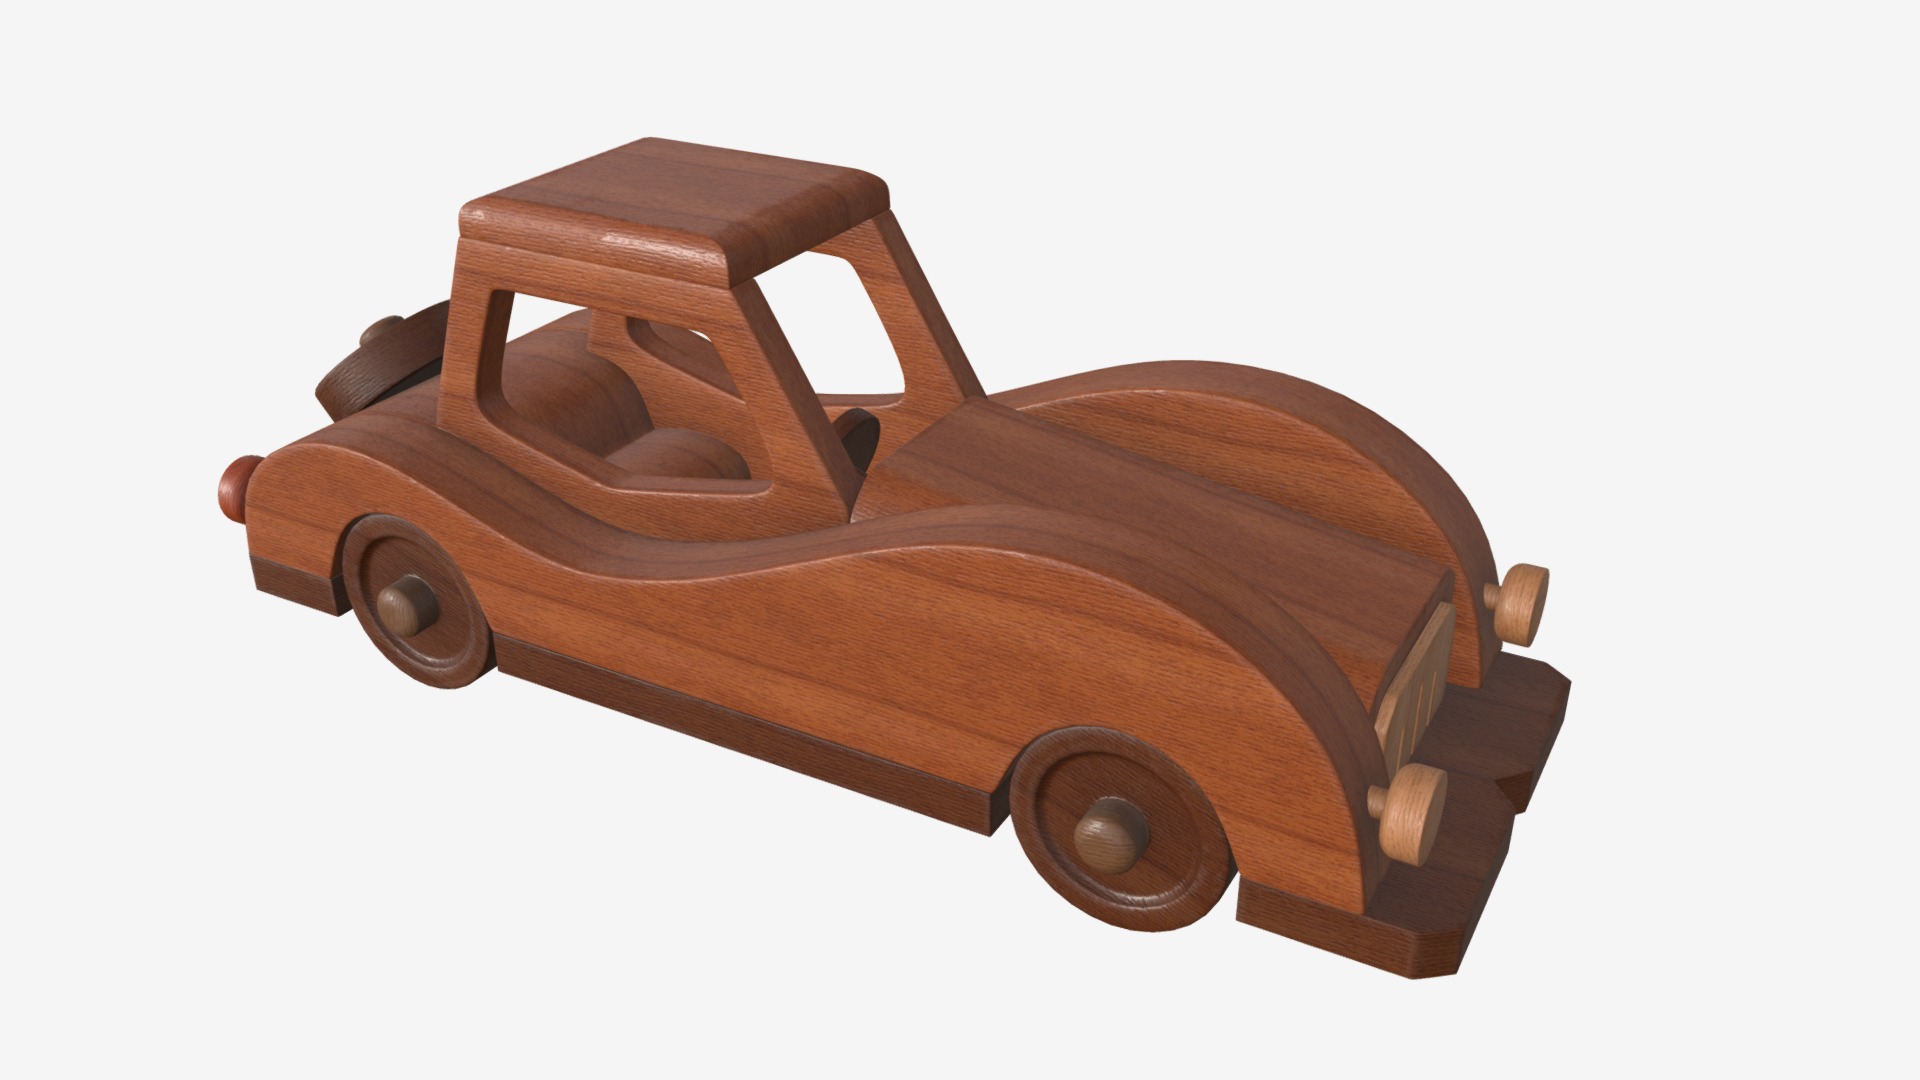 3D model Retro wooden toy car - This is a 3D model of the Retro wooden toy car. The 3D model is about a wooden object with wheels.